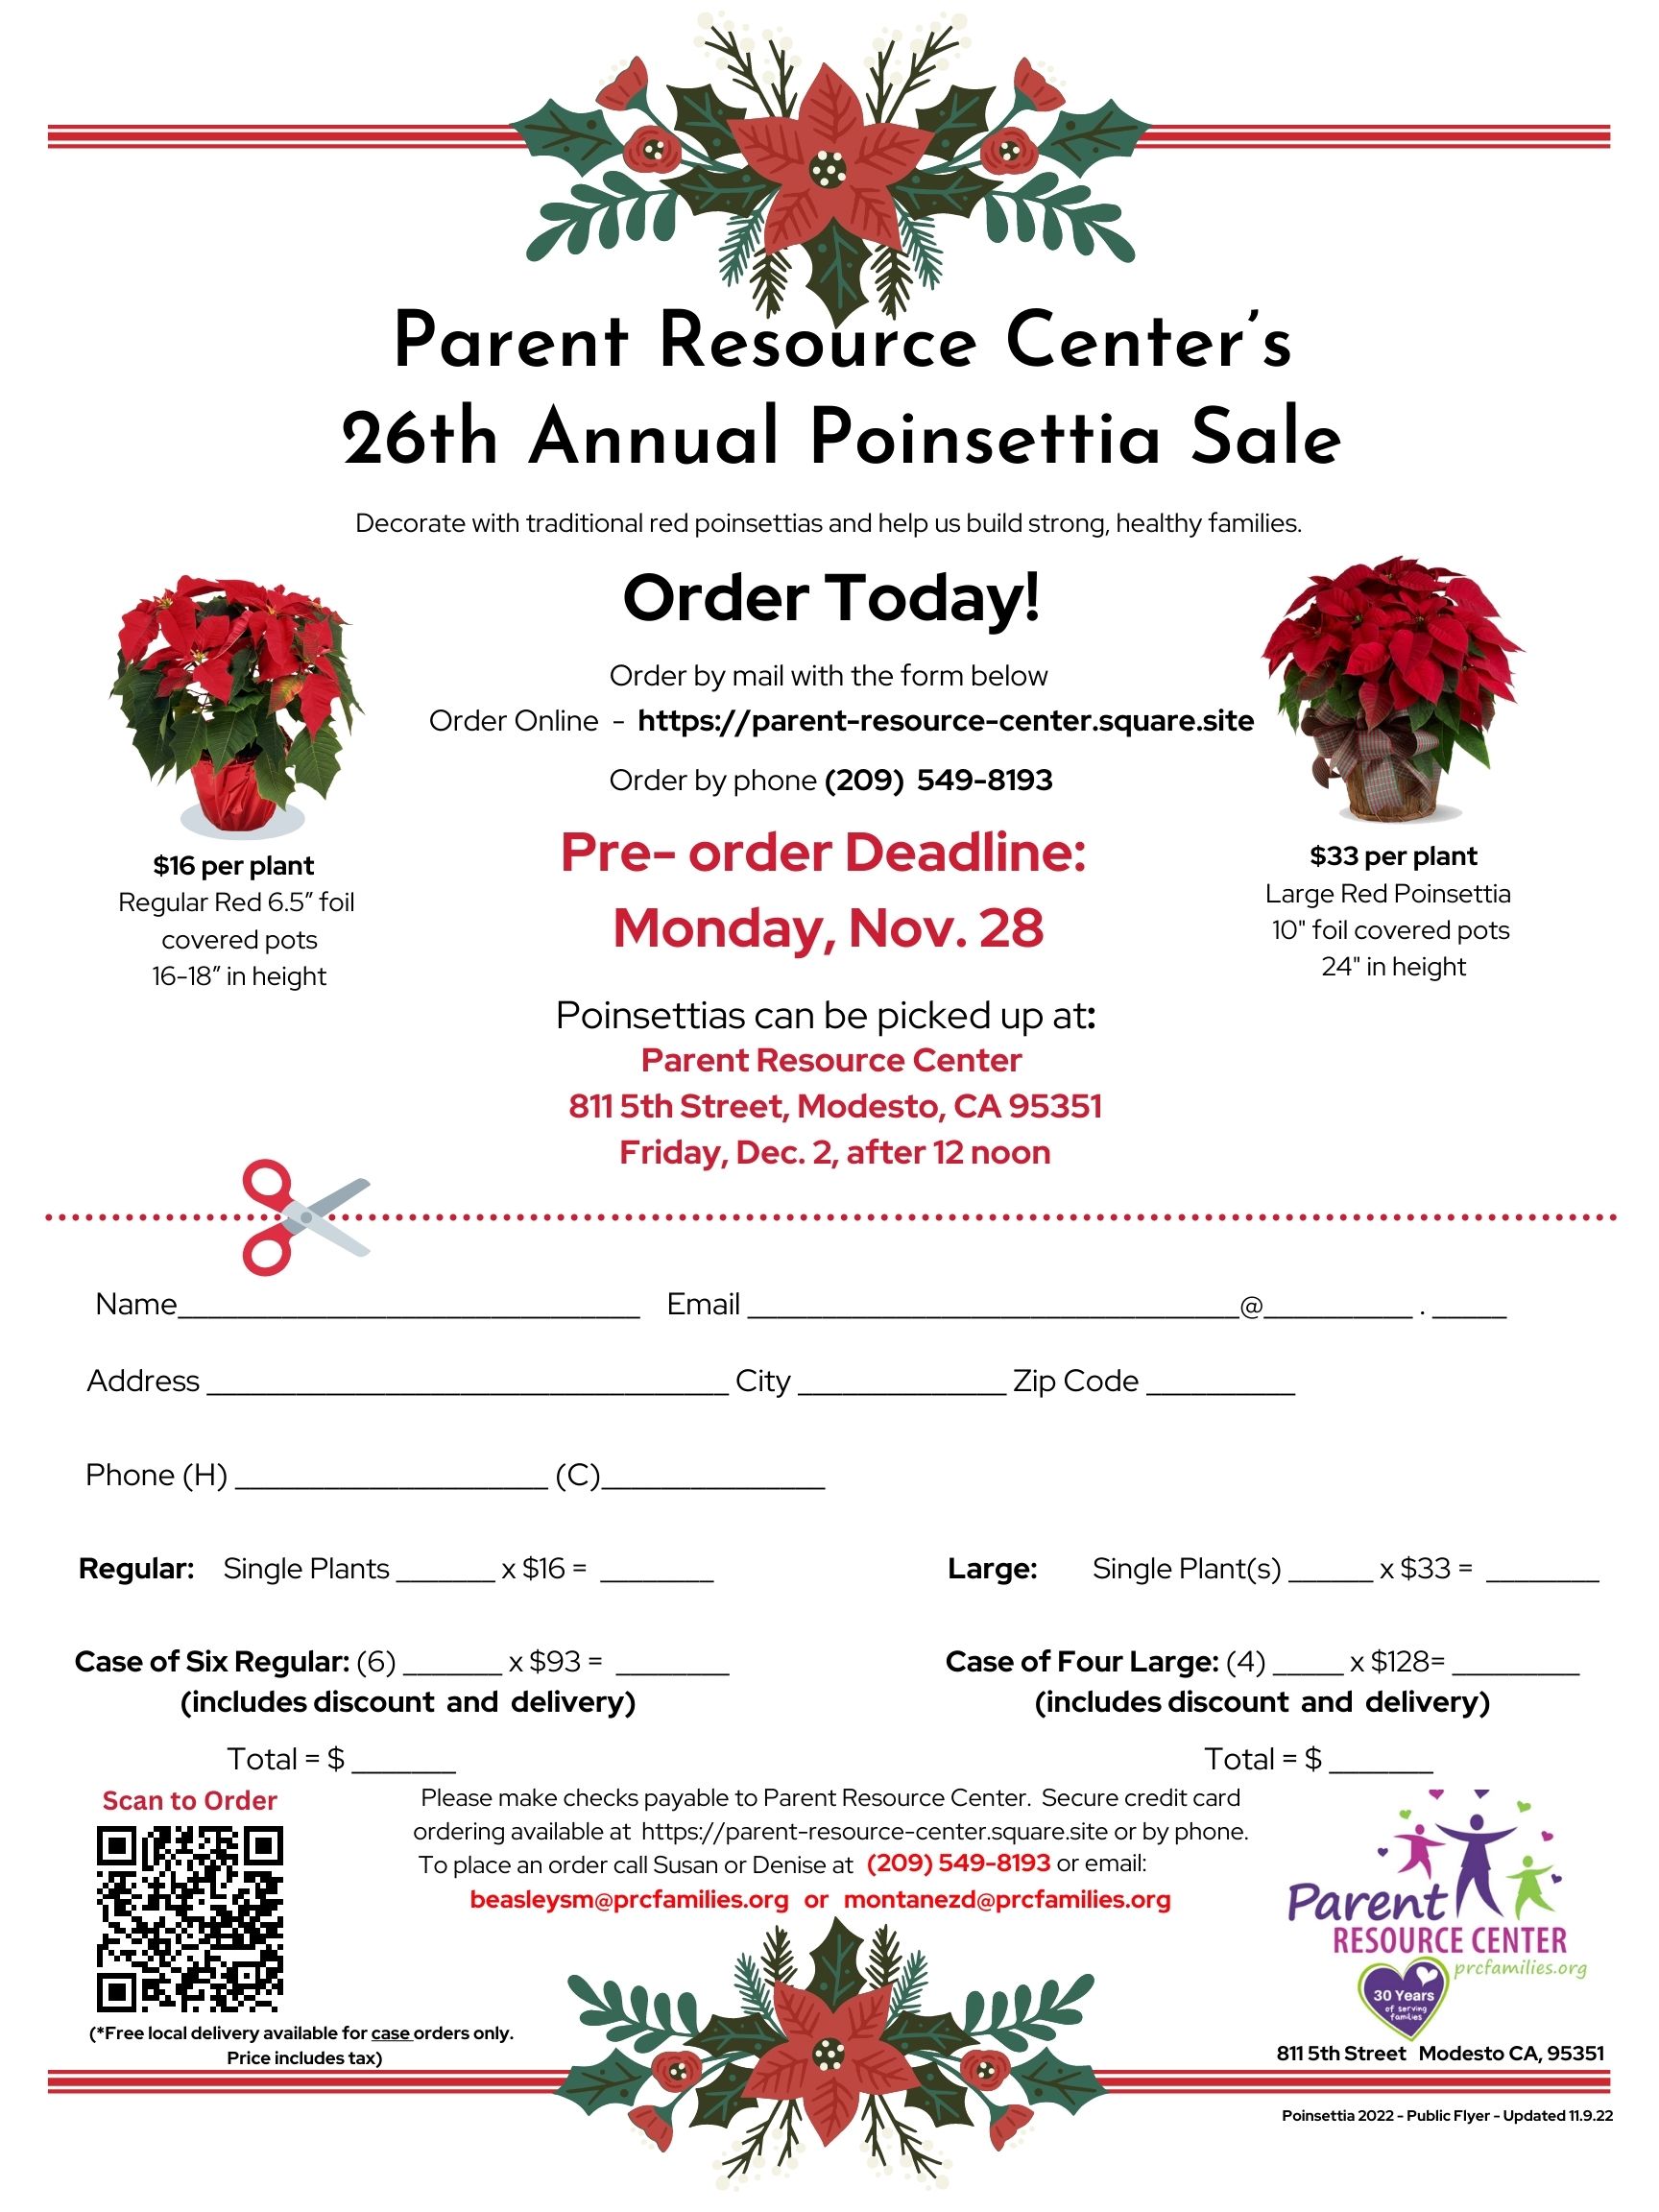 26th annual poinsettia sale benefits child abuse prevention agency